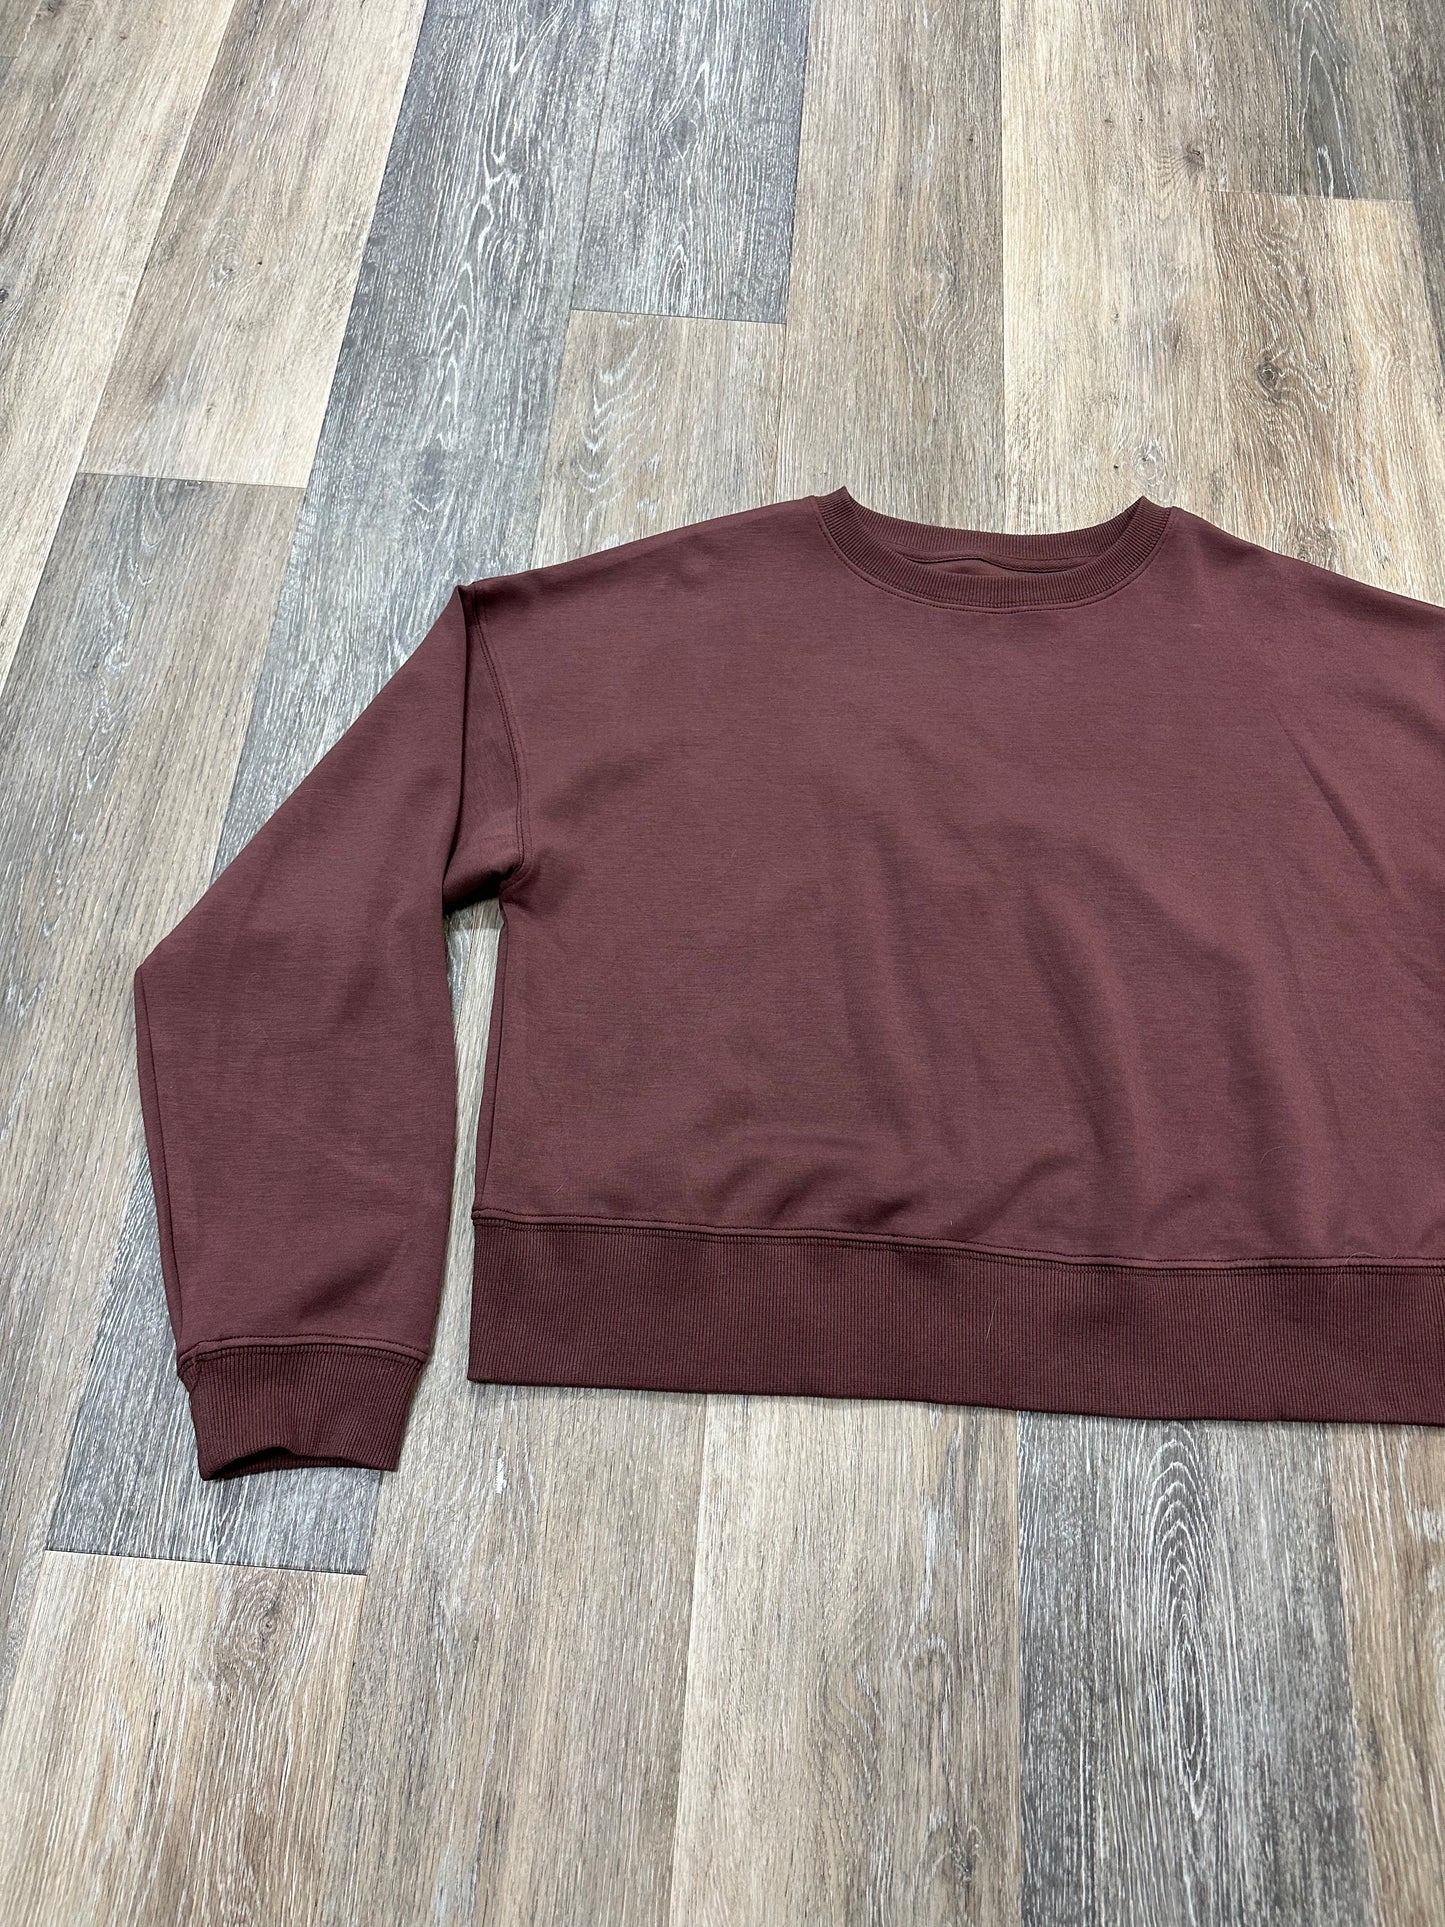 Athletic Top Long Sleeve Crewneck By Thread And Supply  Size: L